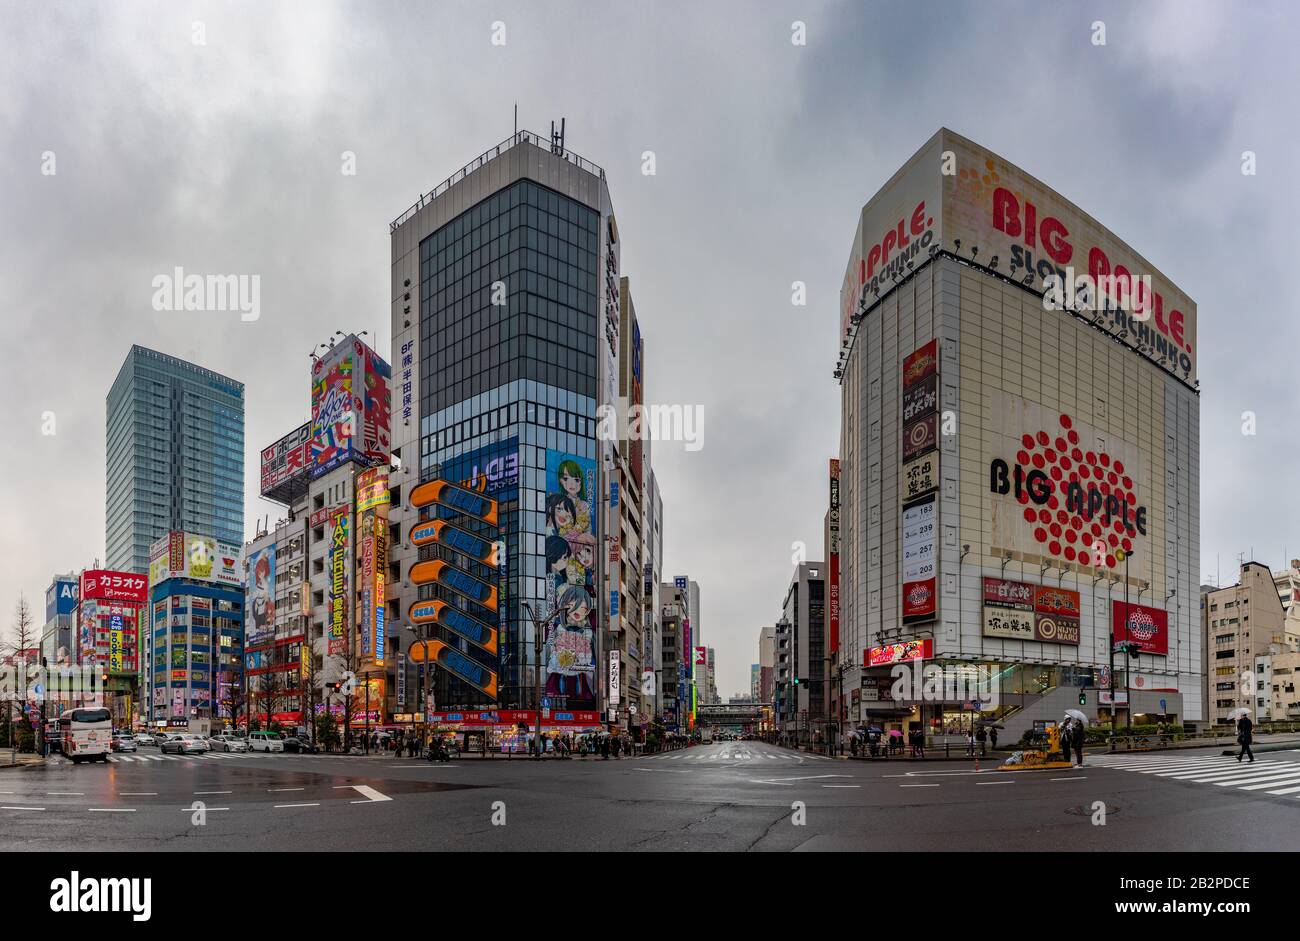 A panorama picture of the colorful facades of the Akihabara district (Tokyo). Stock Photo